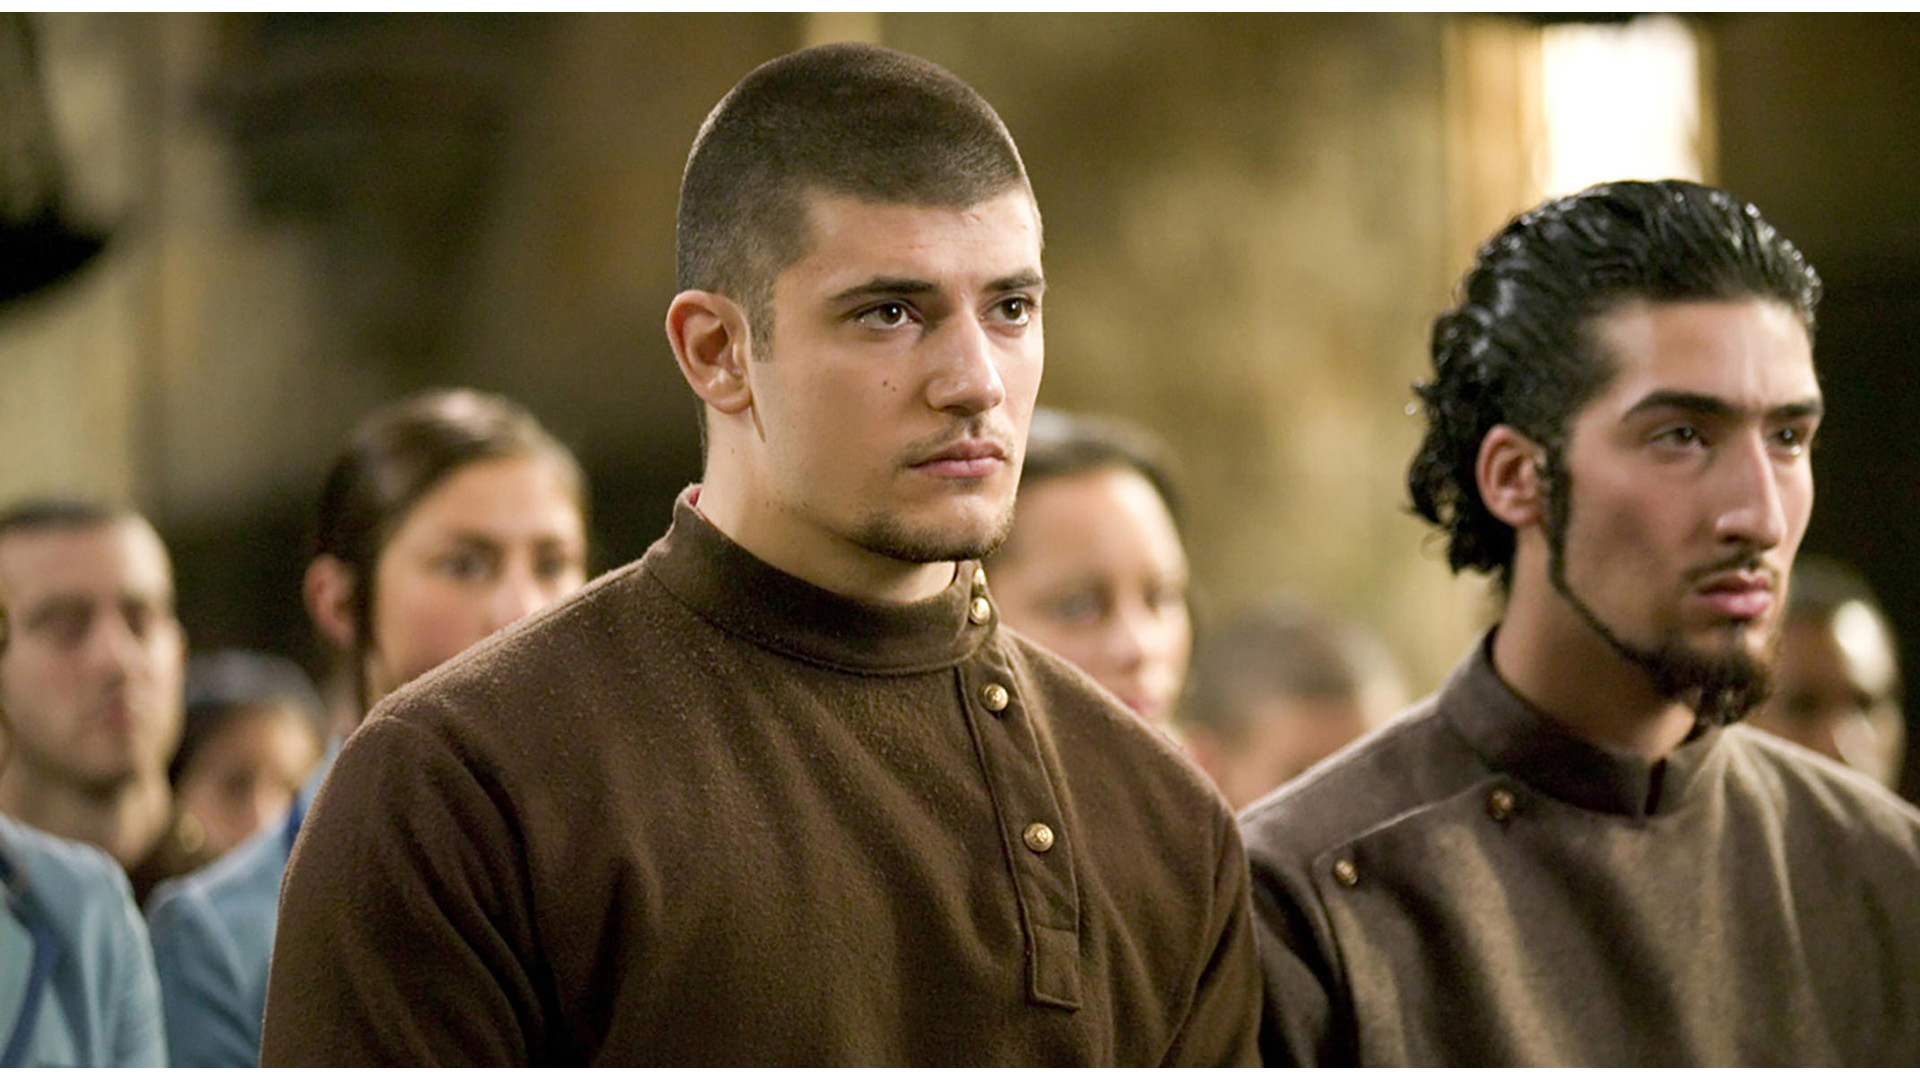 Viktor Krum Was The Biggest Casting Fail in Harry Potter, According to Reddit